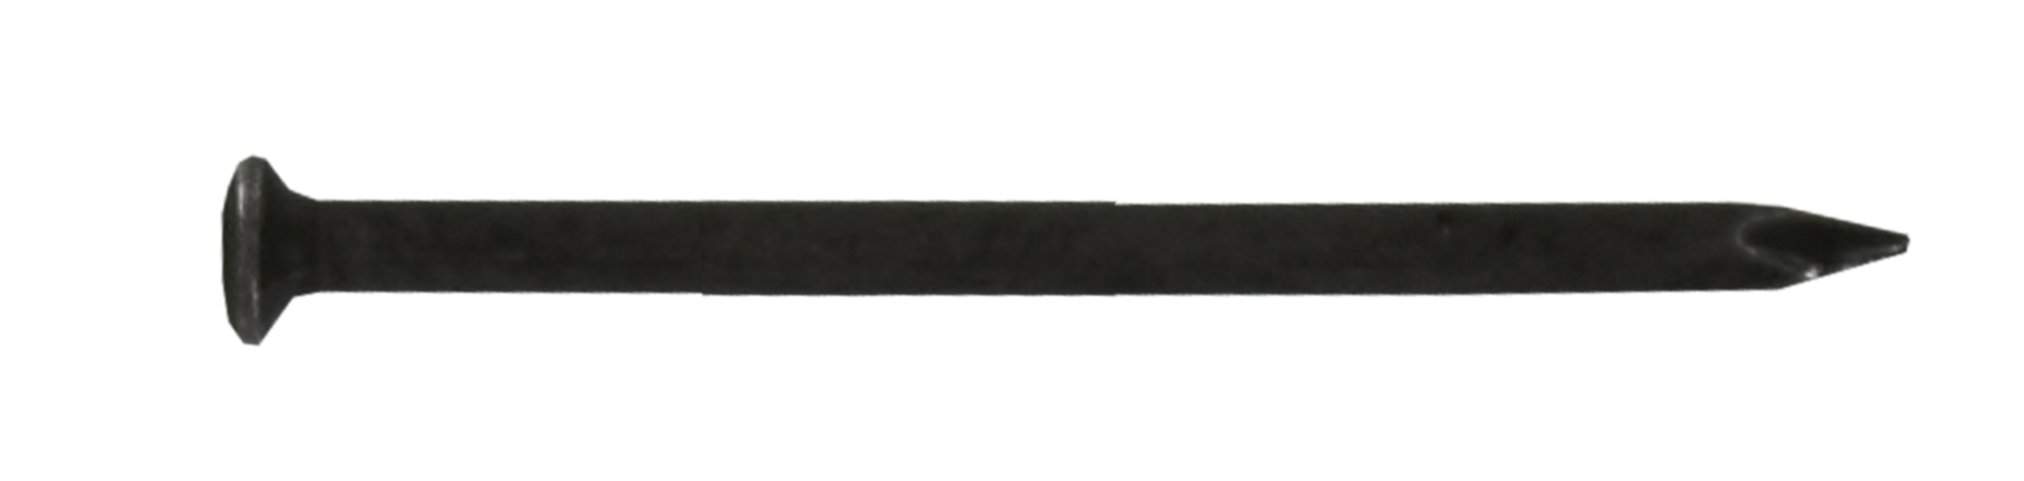 Hardened steel round-headed point 2x25mm, bag of 80<span class='notranslate' data-dgexclude>grams</span>.